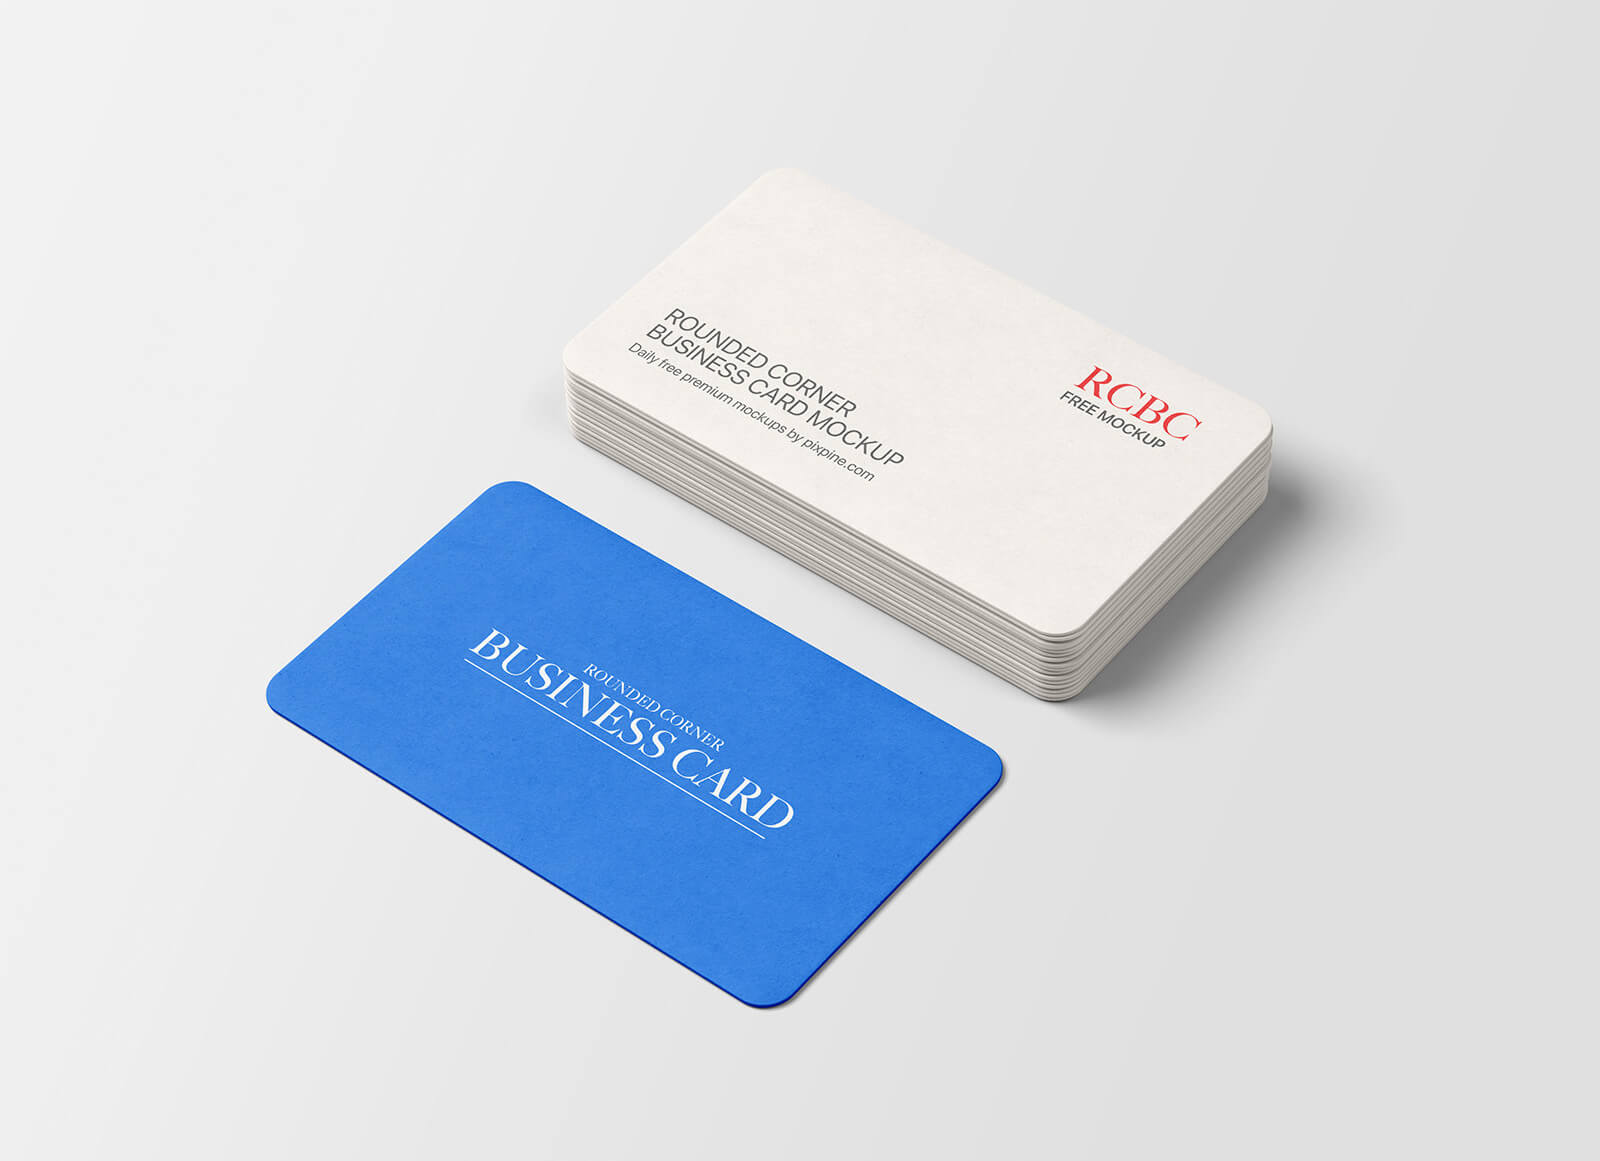 Free Rounded Corner Business Card Mockup PSD